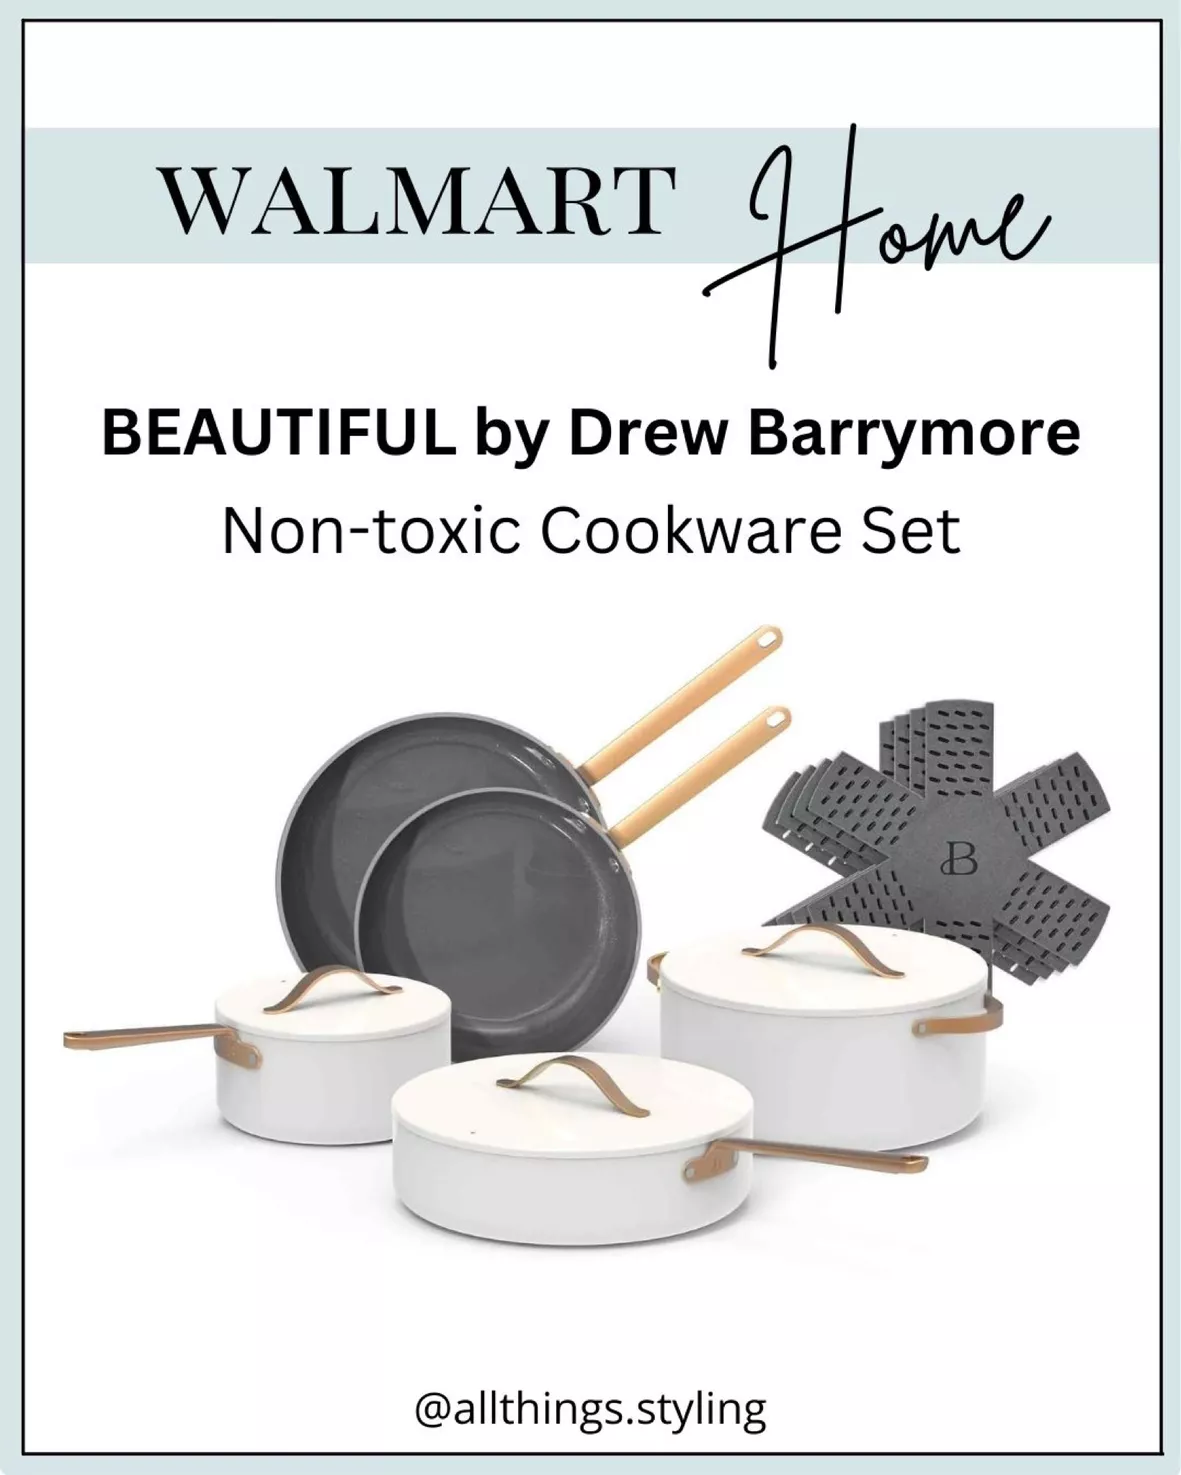 Beautiful 12pc Ceramic Non-Stick Cookware Set, White Icing by Drew